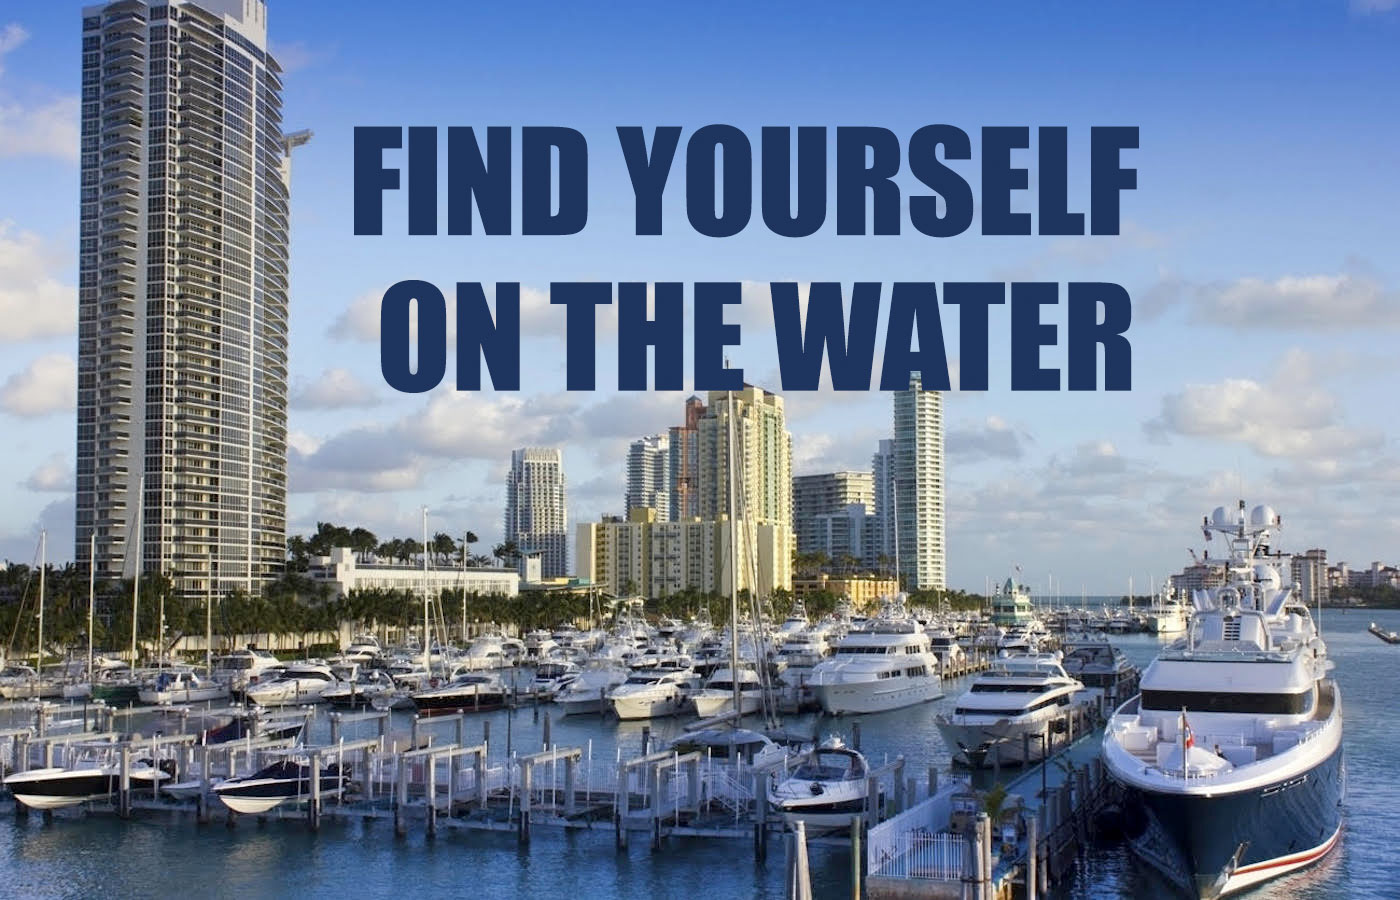 New + Used Boat Brokers In Miami [Buyer’s Guide]